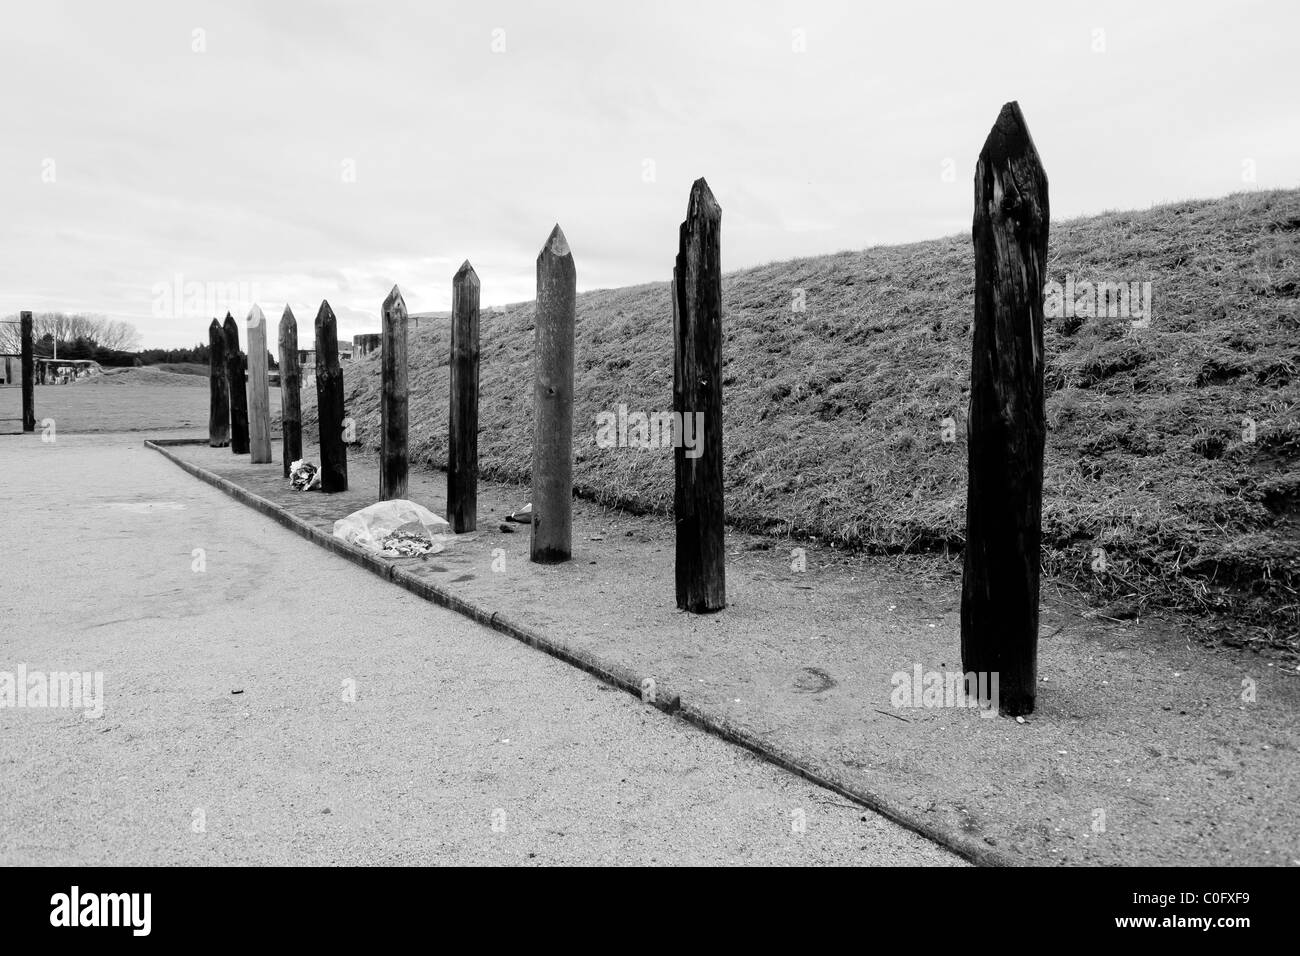 Execution area at the Fort Breendonk, a former Nazi concentration camp in Belgium. Stock Photo